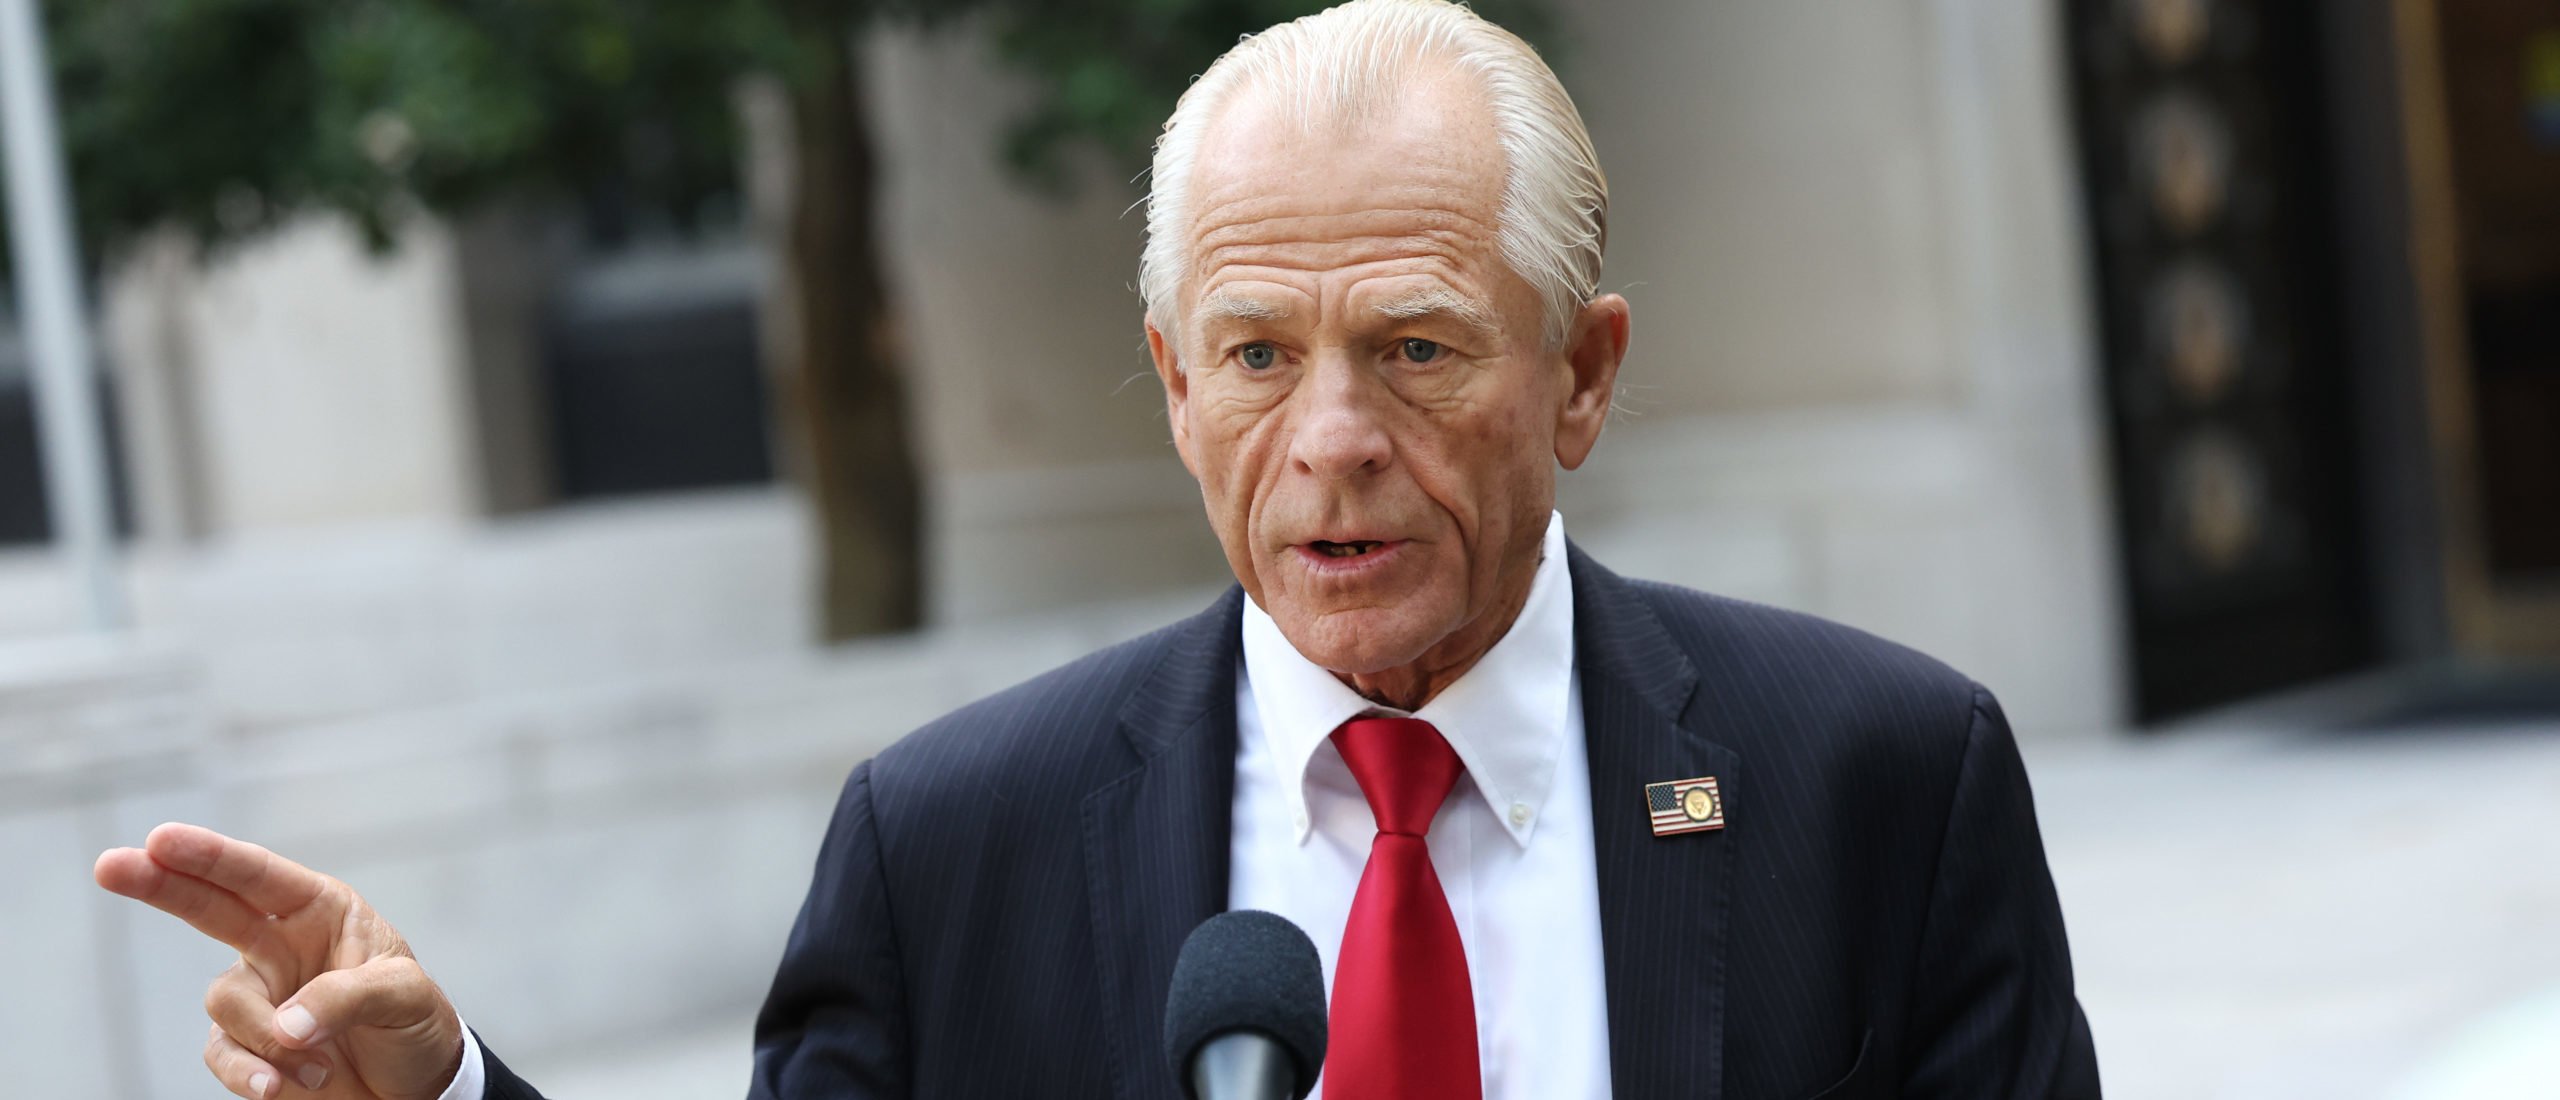 Peter Navarro, an advisor to former U.S. President Donald Trump, speaks to reporters as he arrives at the E. Barrett Prettyman Courthouse on September 07, 2023 in Washington, DC. The jury is expected to begin deliberating today in Navarro's contempt of Congress case for failing to comply with a congressional subpoena from the House January 6 Committee. (Photo by Kevin Dietsch/Getty Images)